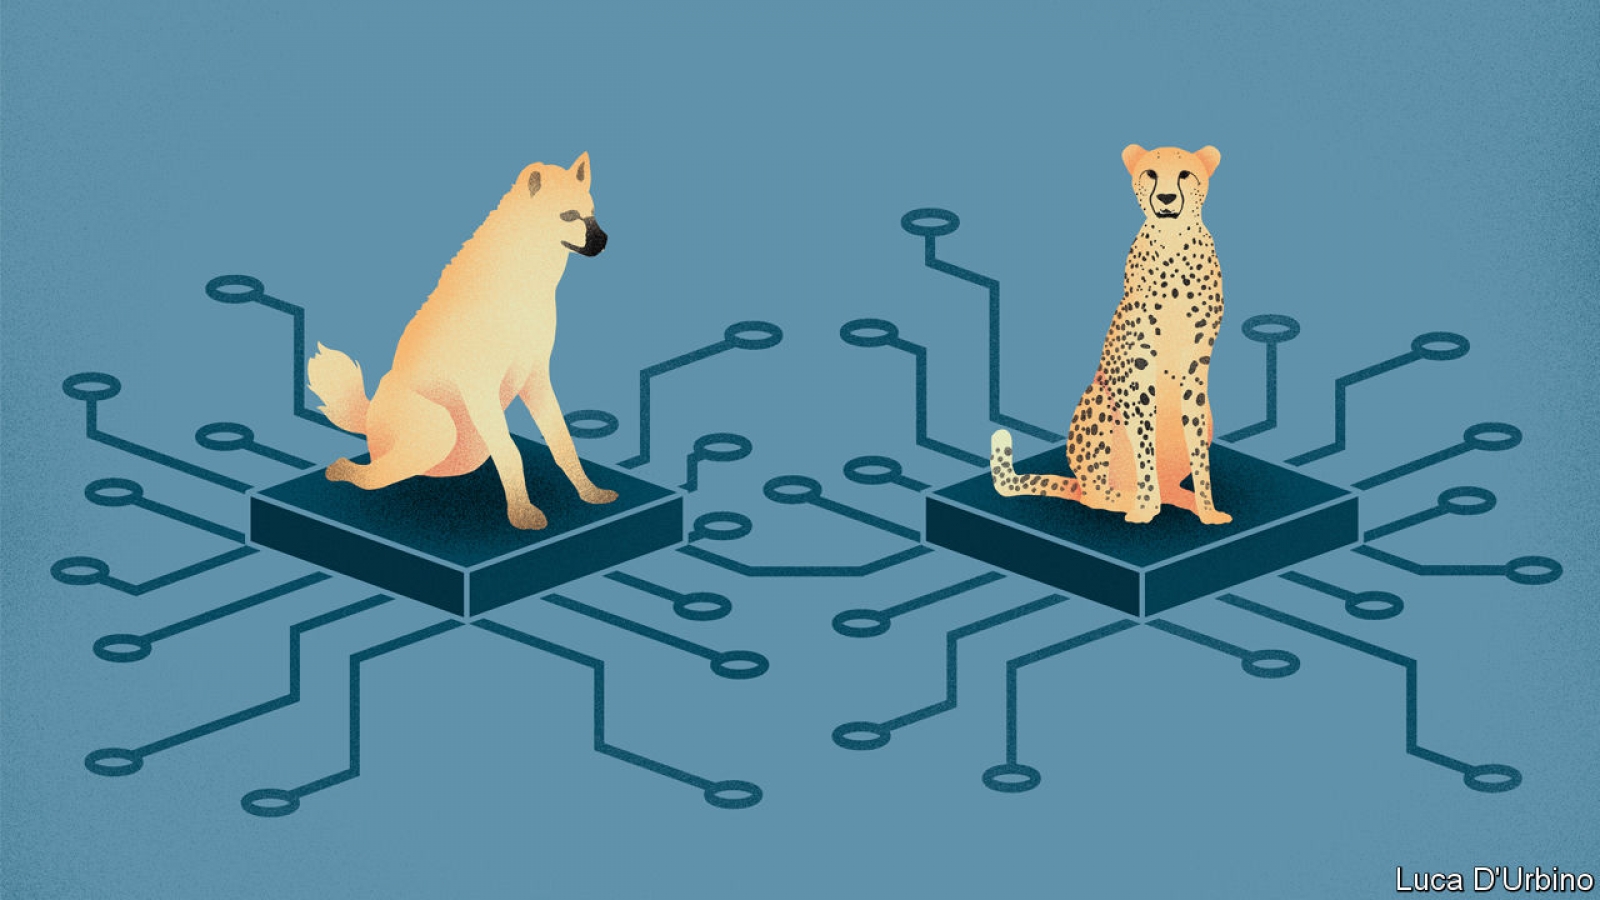 Artificial intelligence is awakening the chip industry’s animal spirits